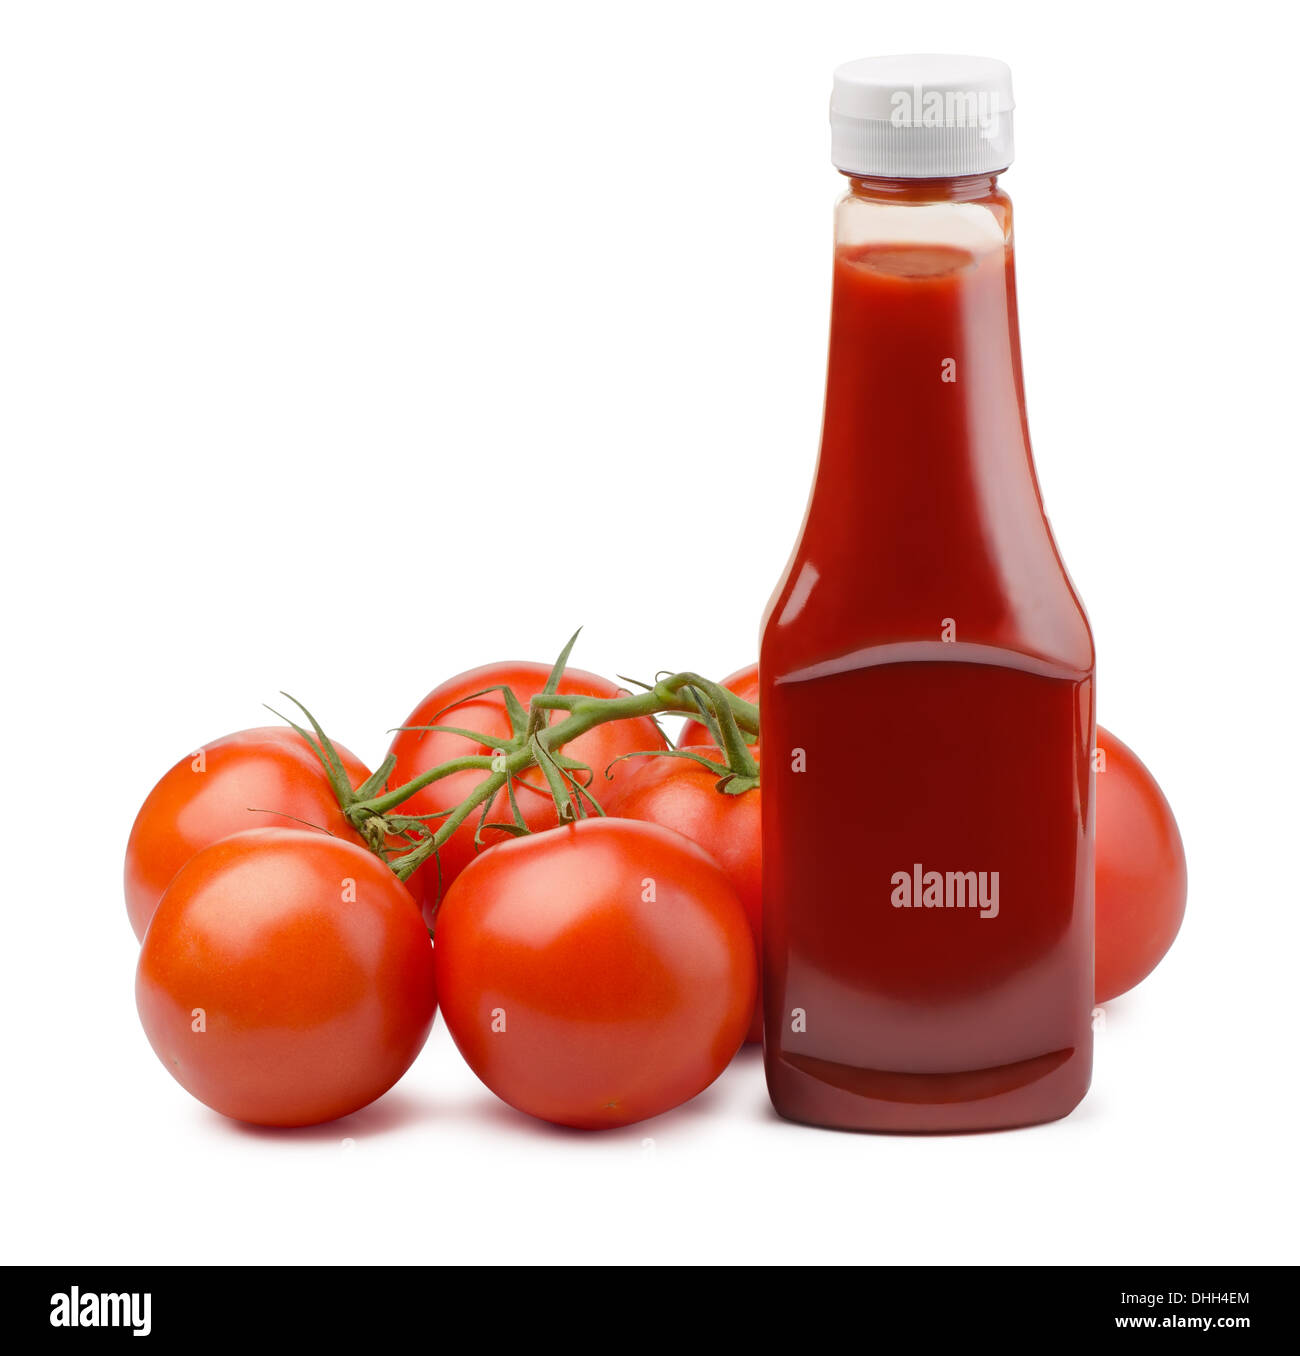 https://c8.alamy.com/comp/DHH4EM/ketchup-bottle-and-fresh-tomatoes-isolated-on-white-DHH4EM.jpg